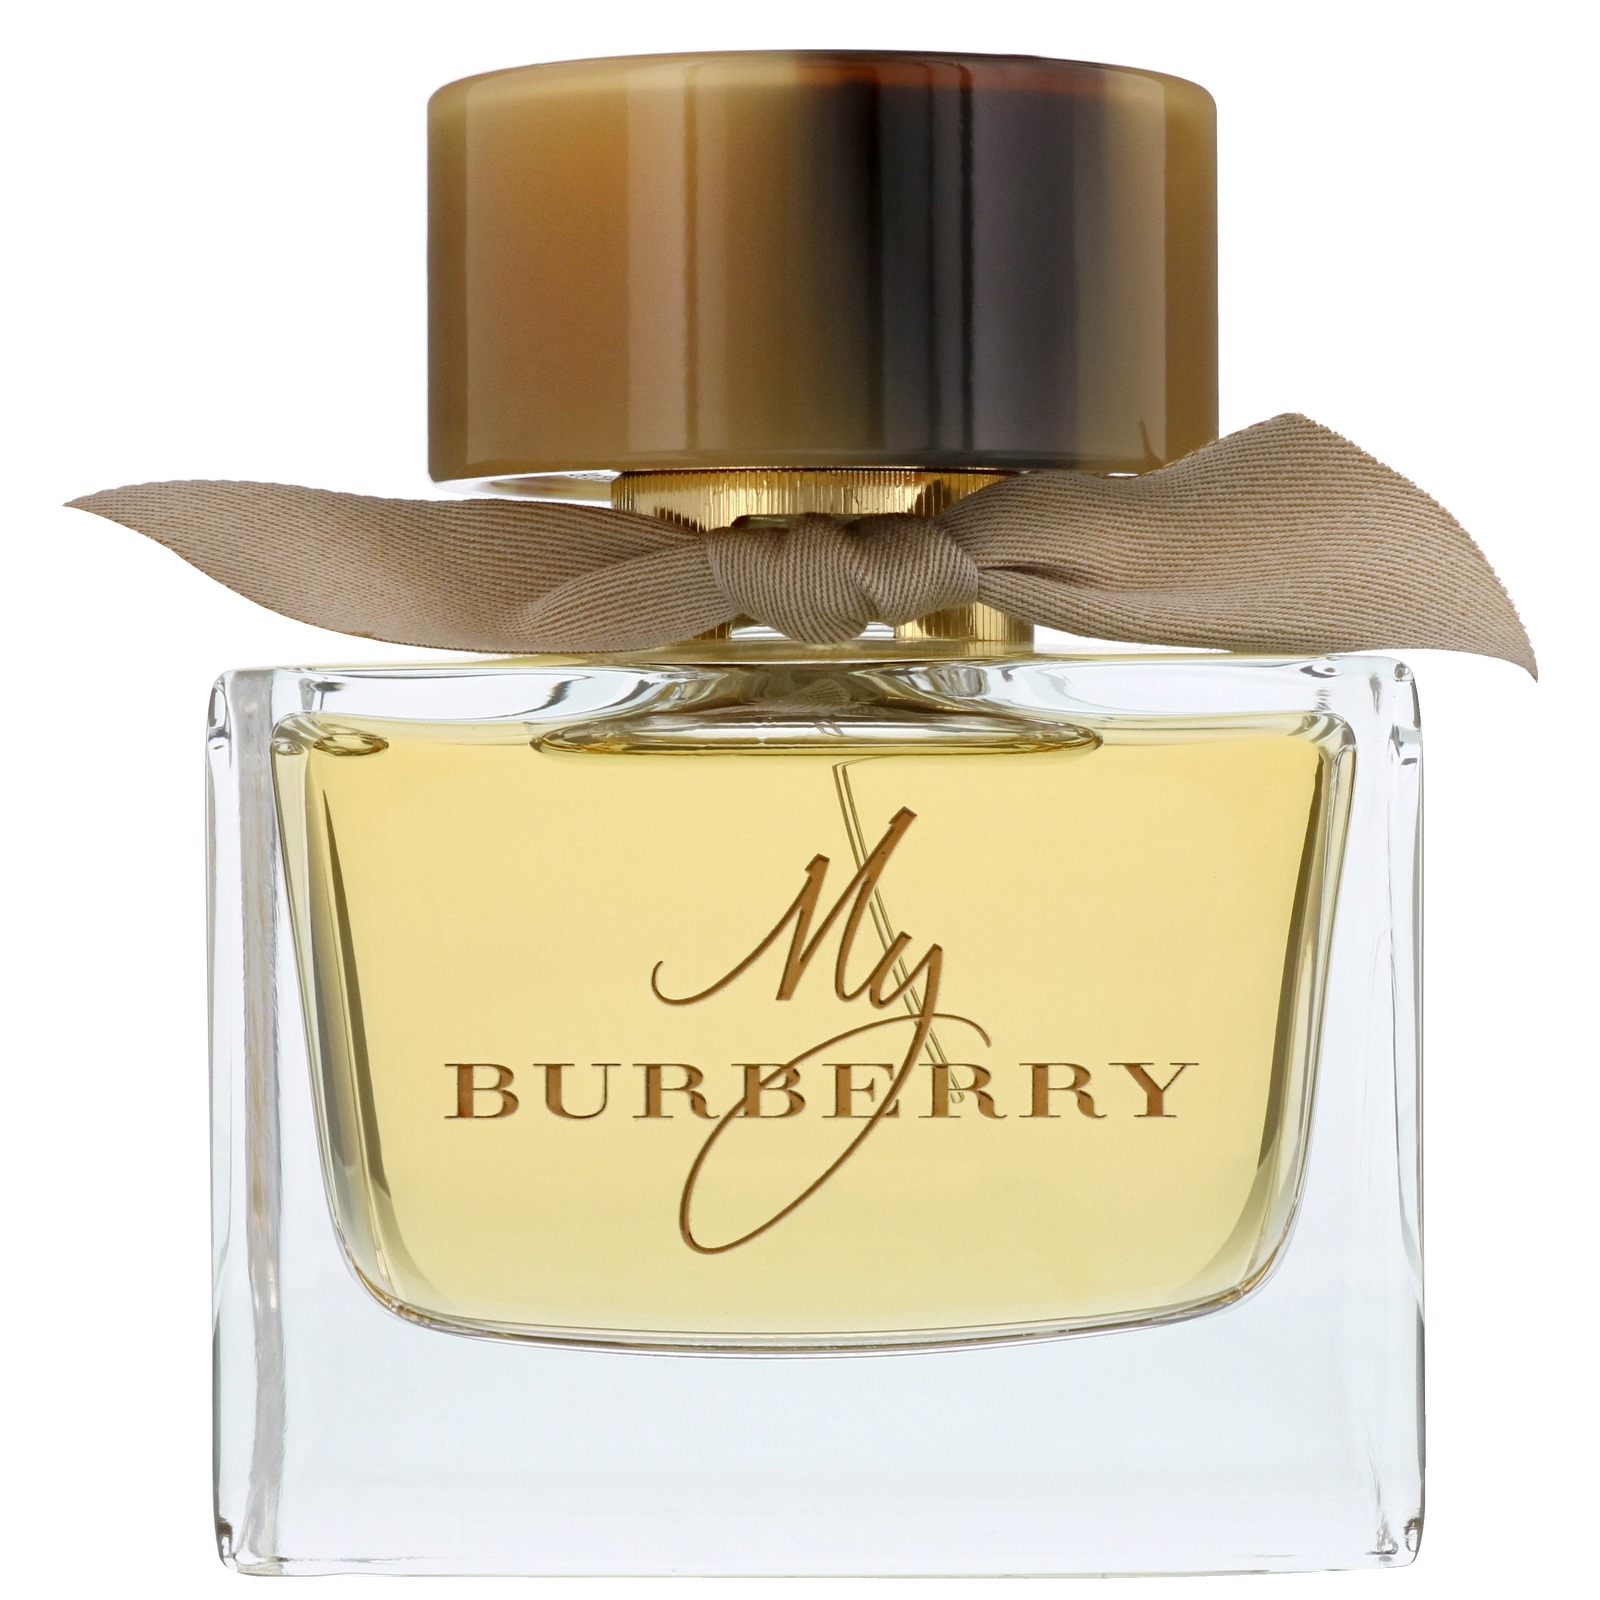 Huddle syreindhold pude burberry my burberry edp 90ml> OFF-50%